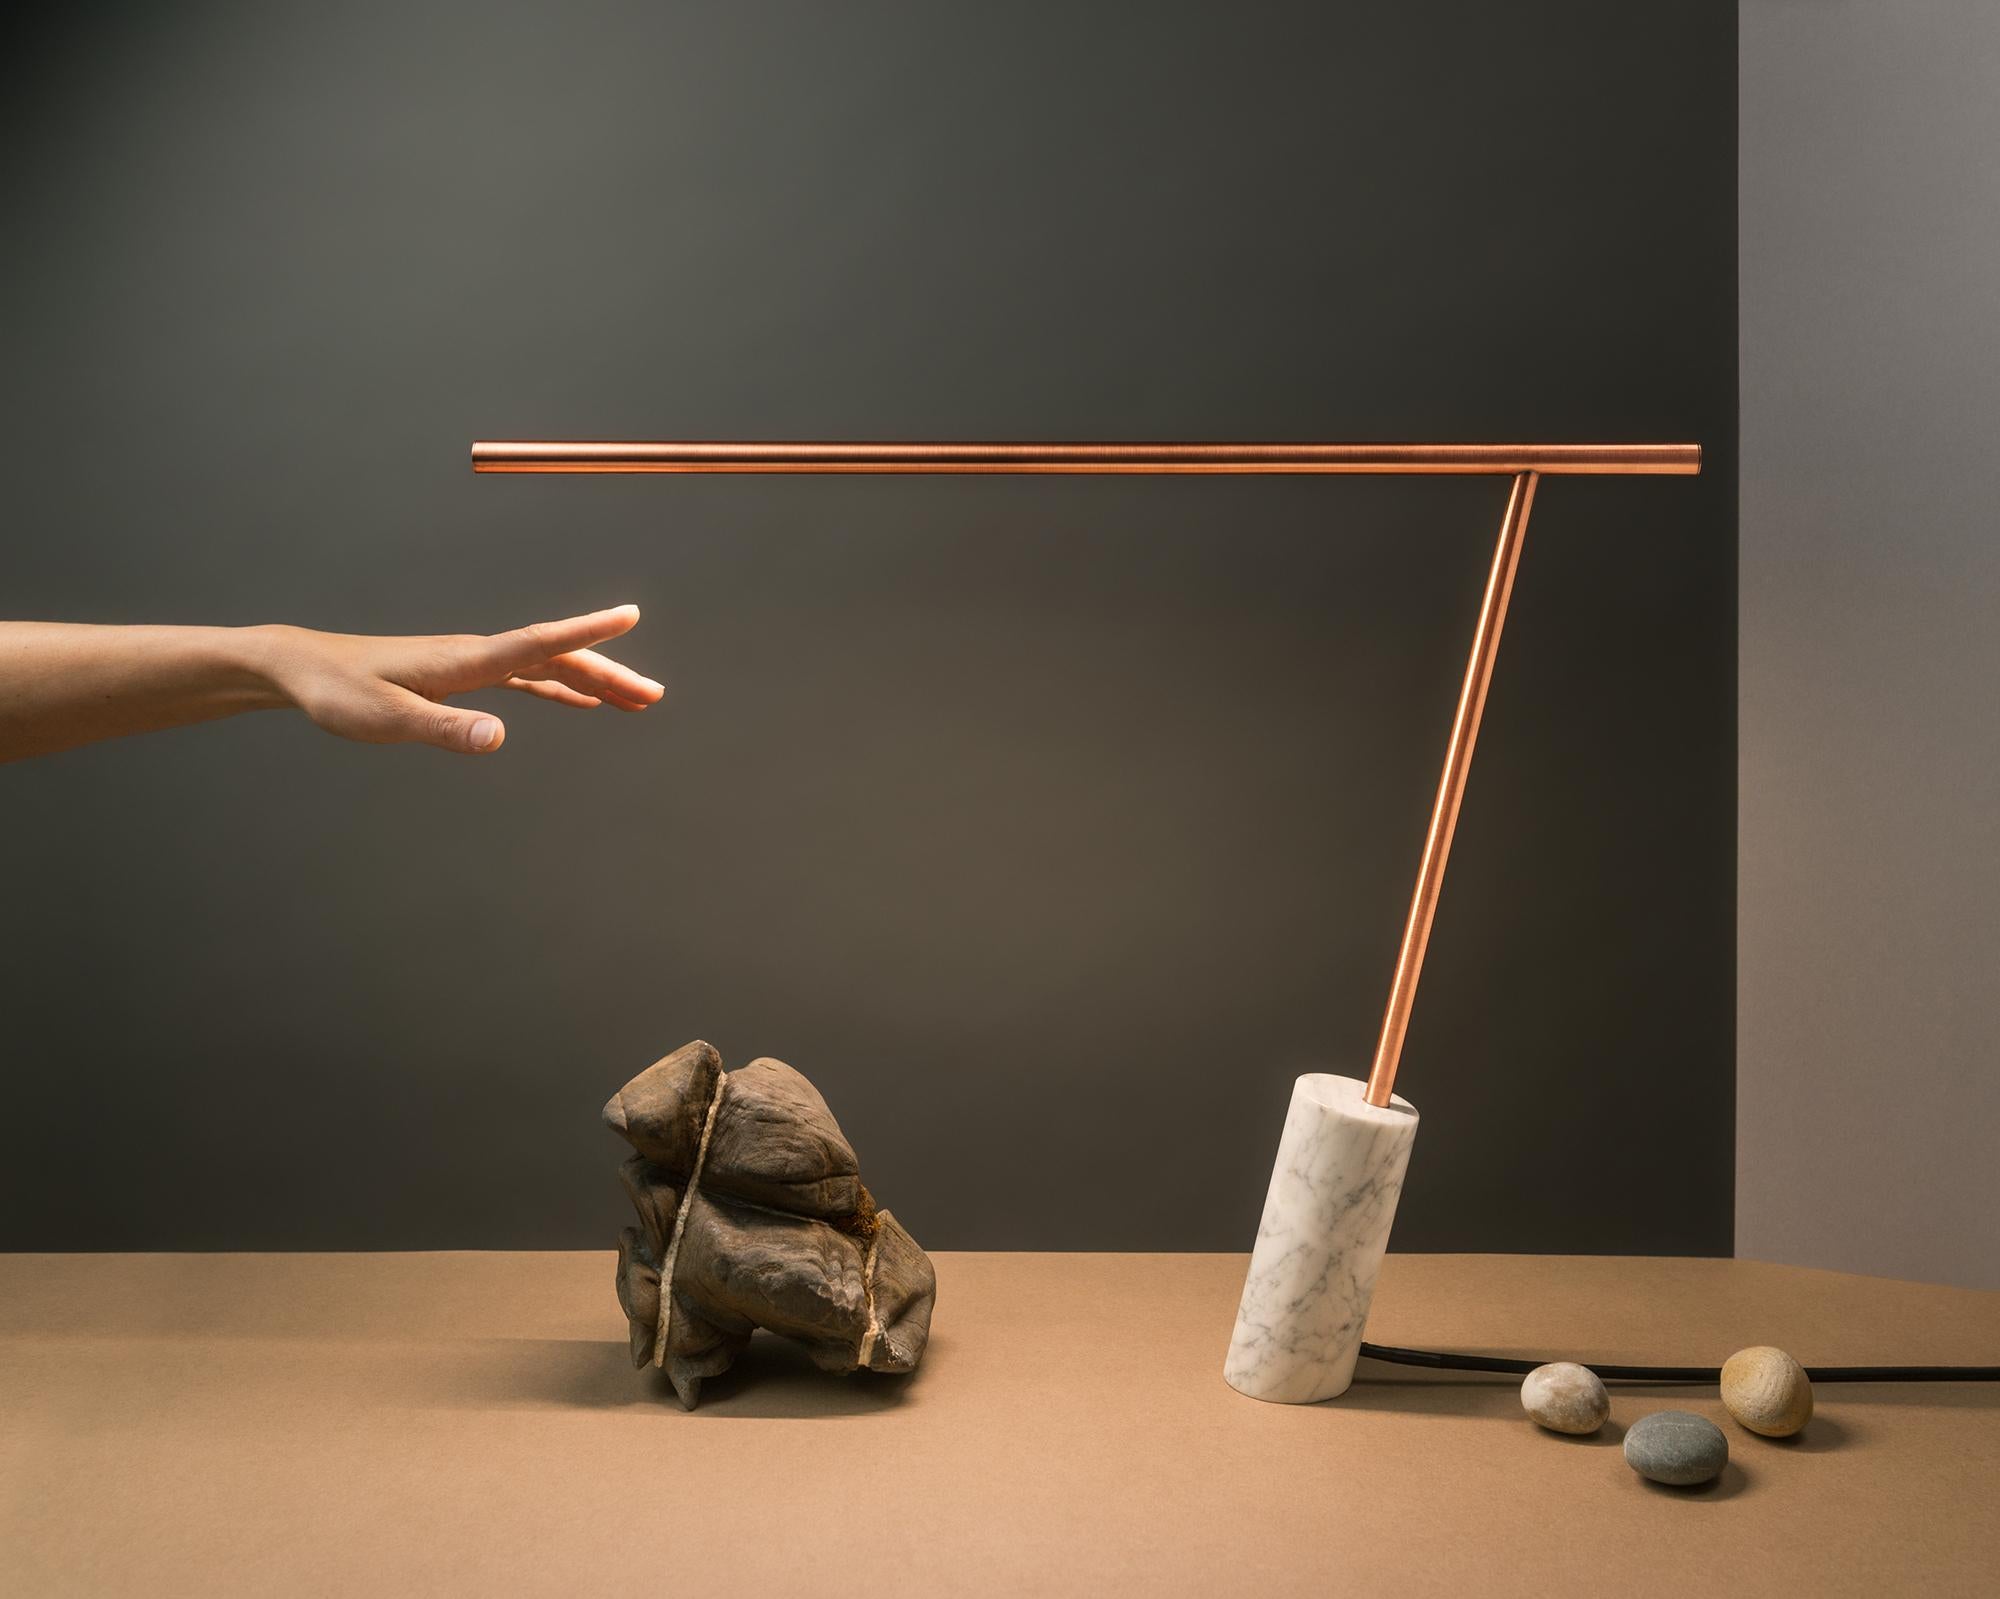 Original copper marble table lamp signed by Adam Ruiz & Cyril Fuchs
Dimensions: 45 x 57 x 4 cm
Materials: Varnished copper and Carrara marble
Hand scultped, signed.

Minimalist, this desk lamp named 0.47 for its proportion ratio is